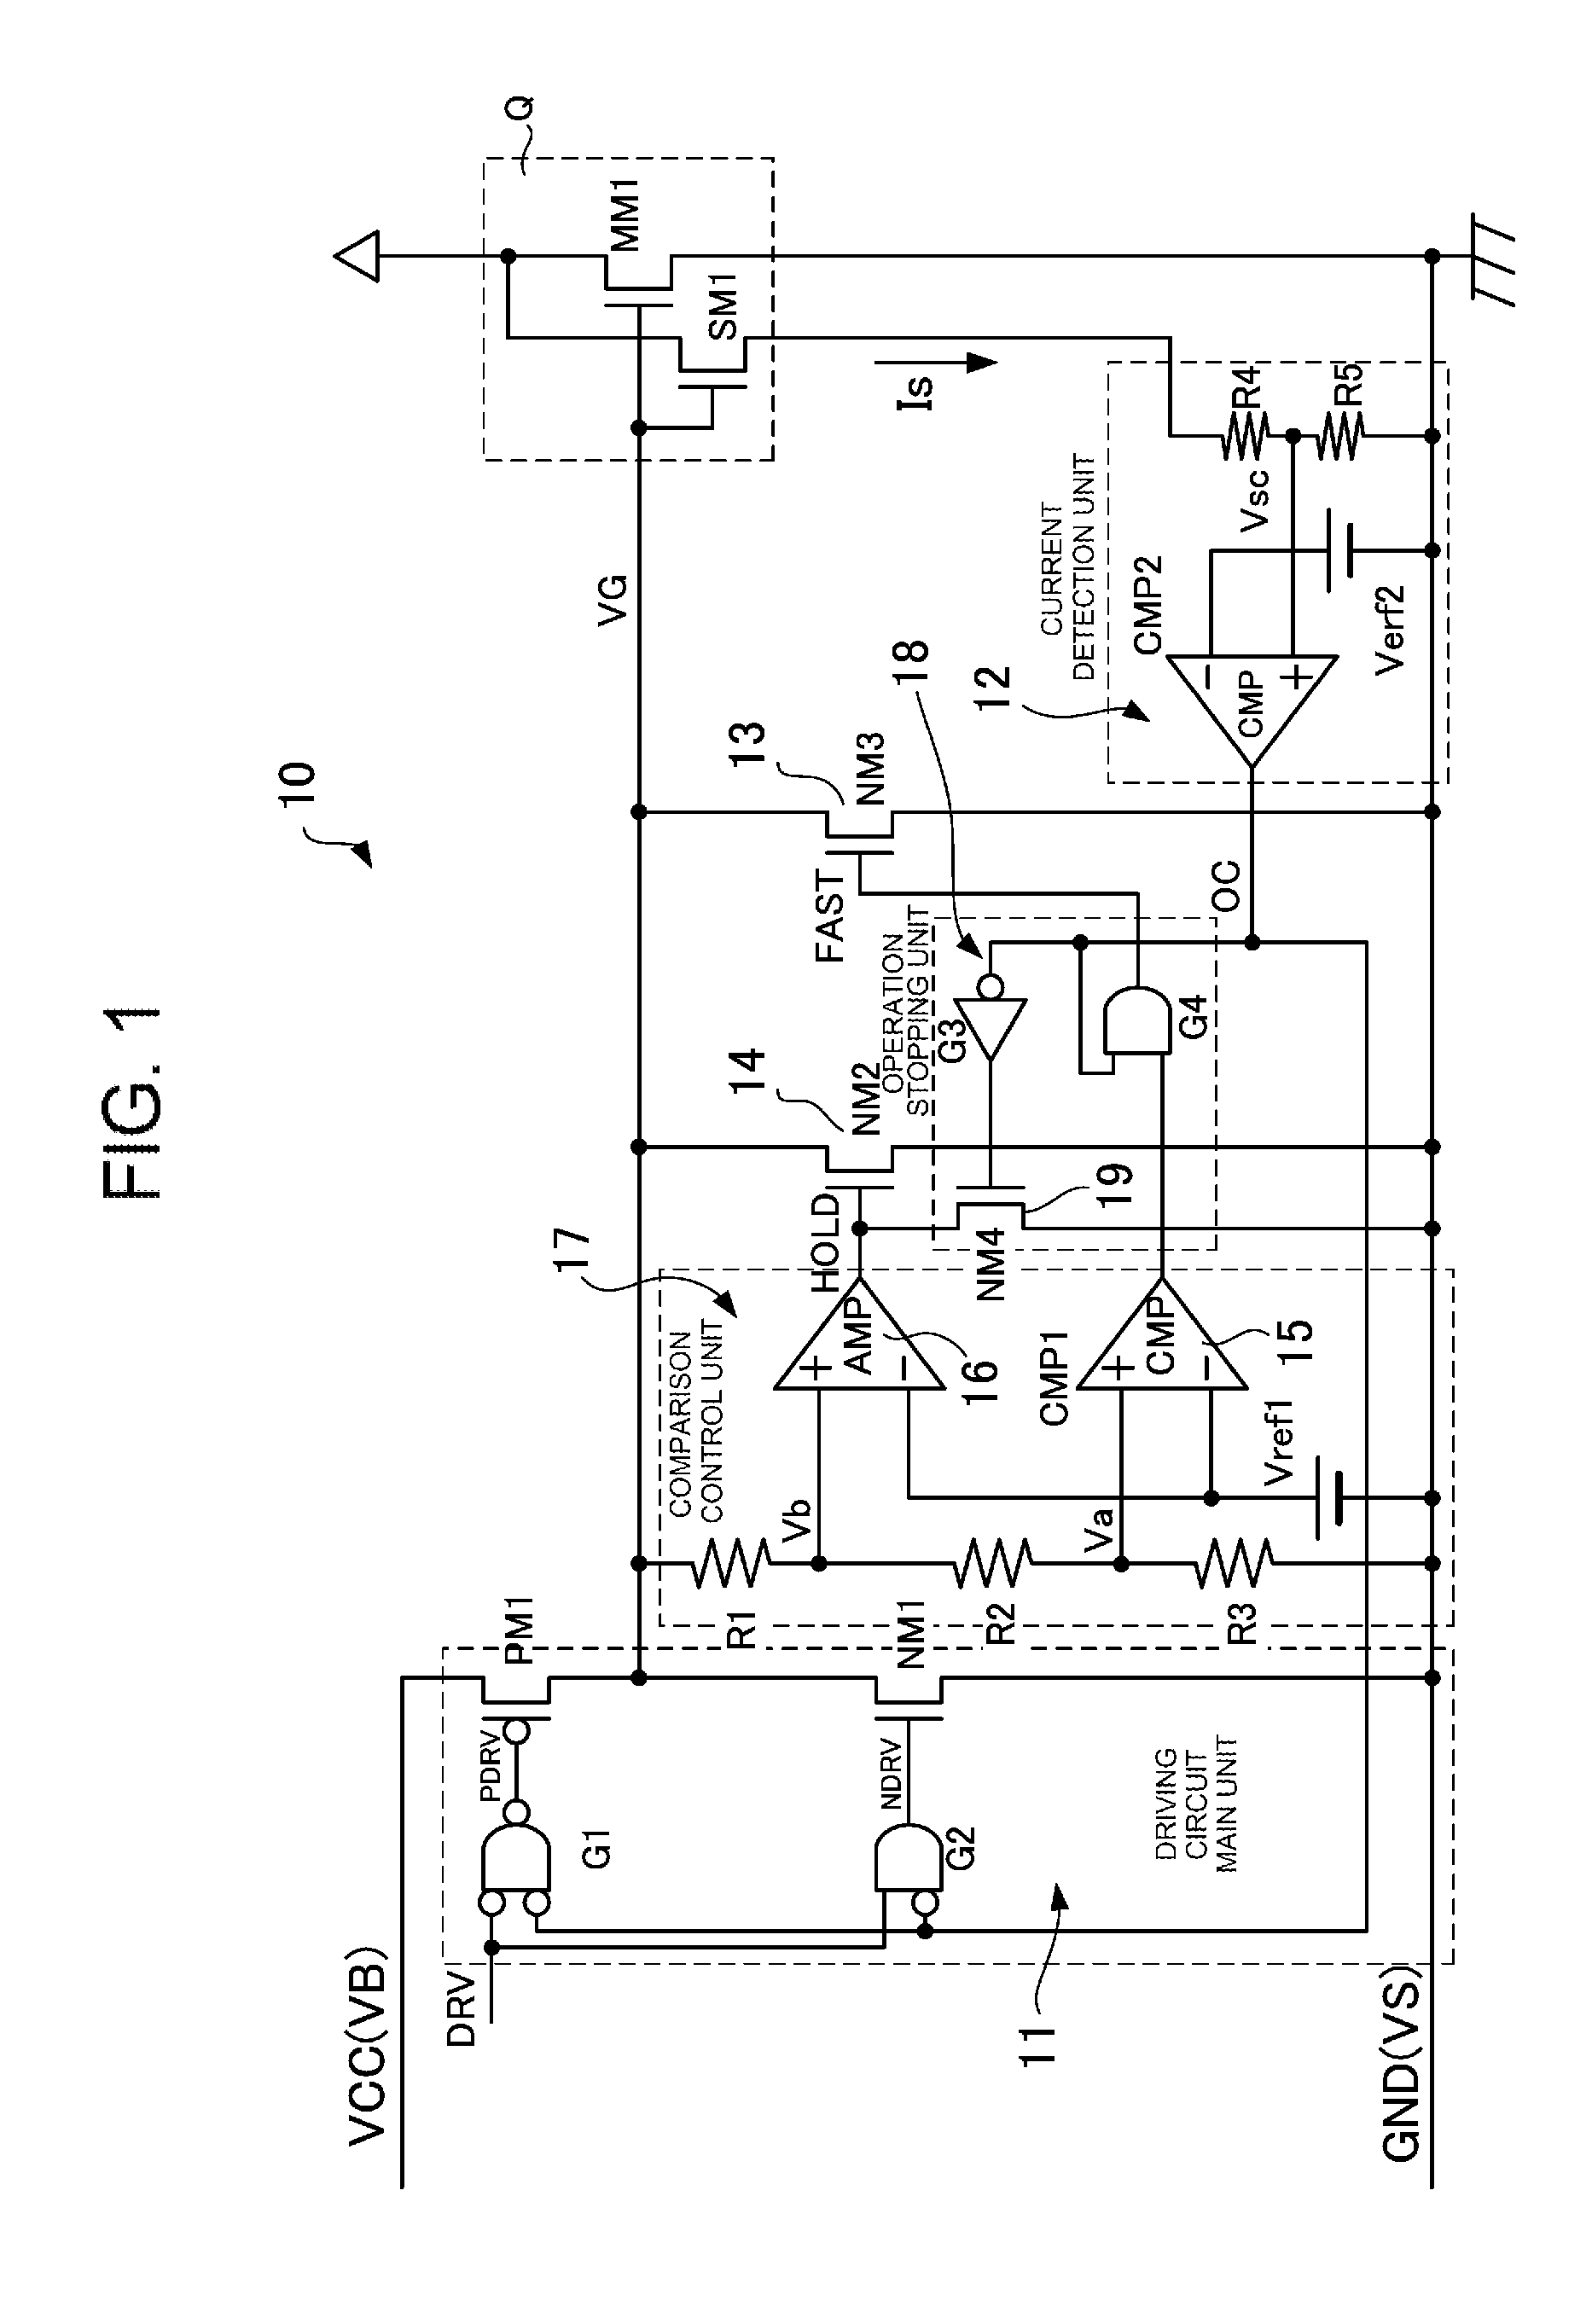 Switching element driving circuit